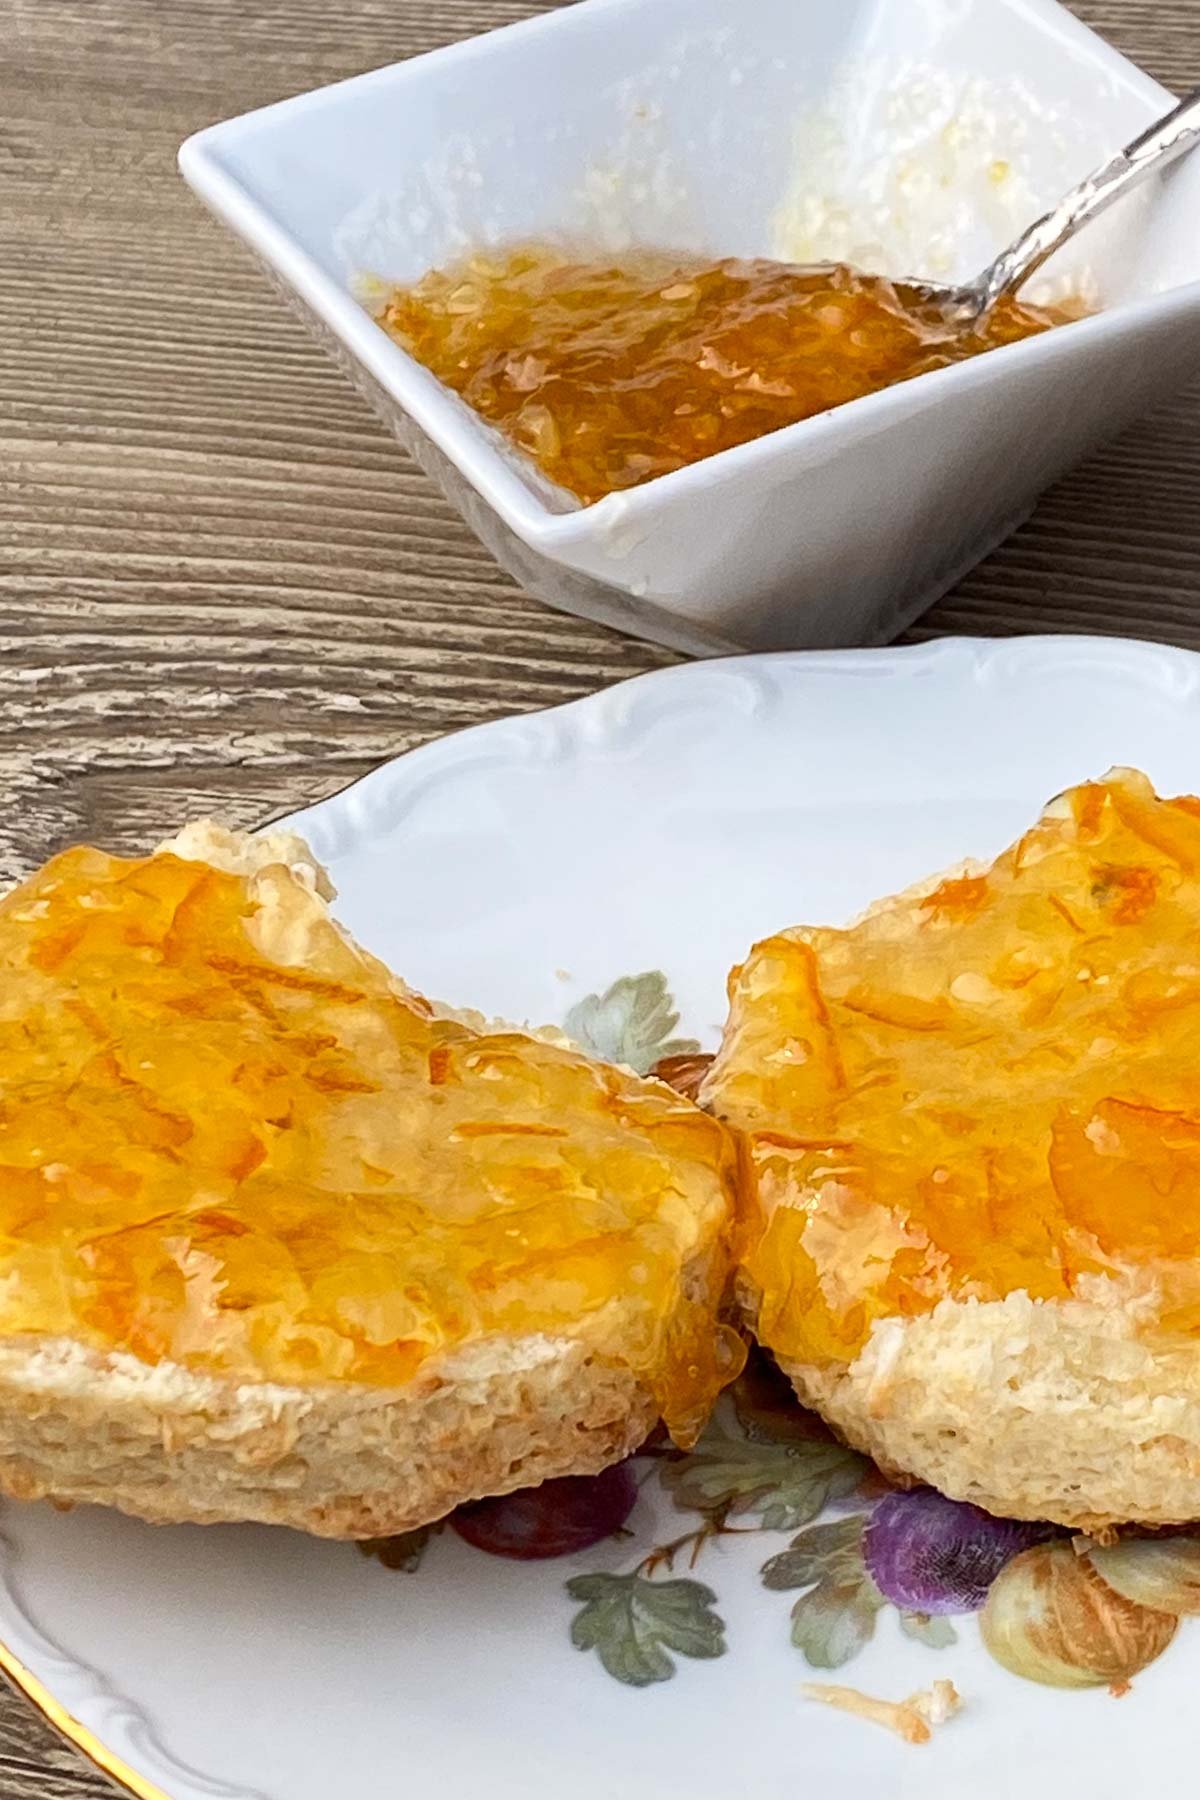 Scones topped with peach jam on decorative plate.